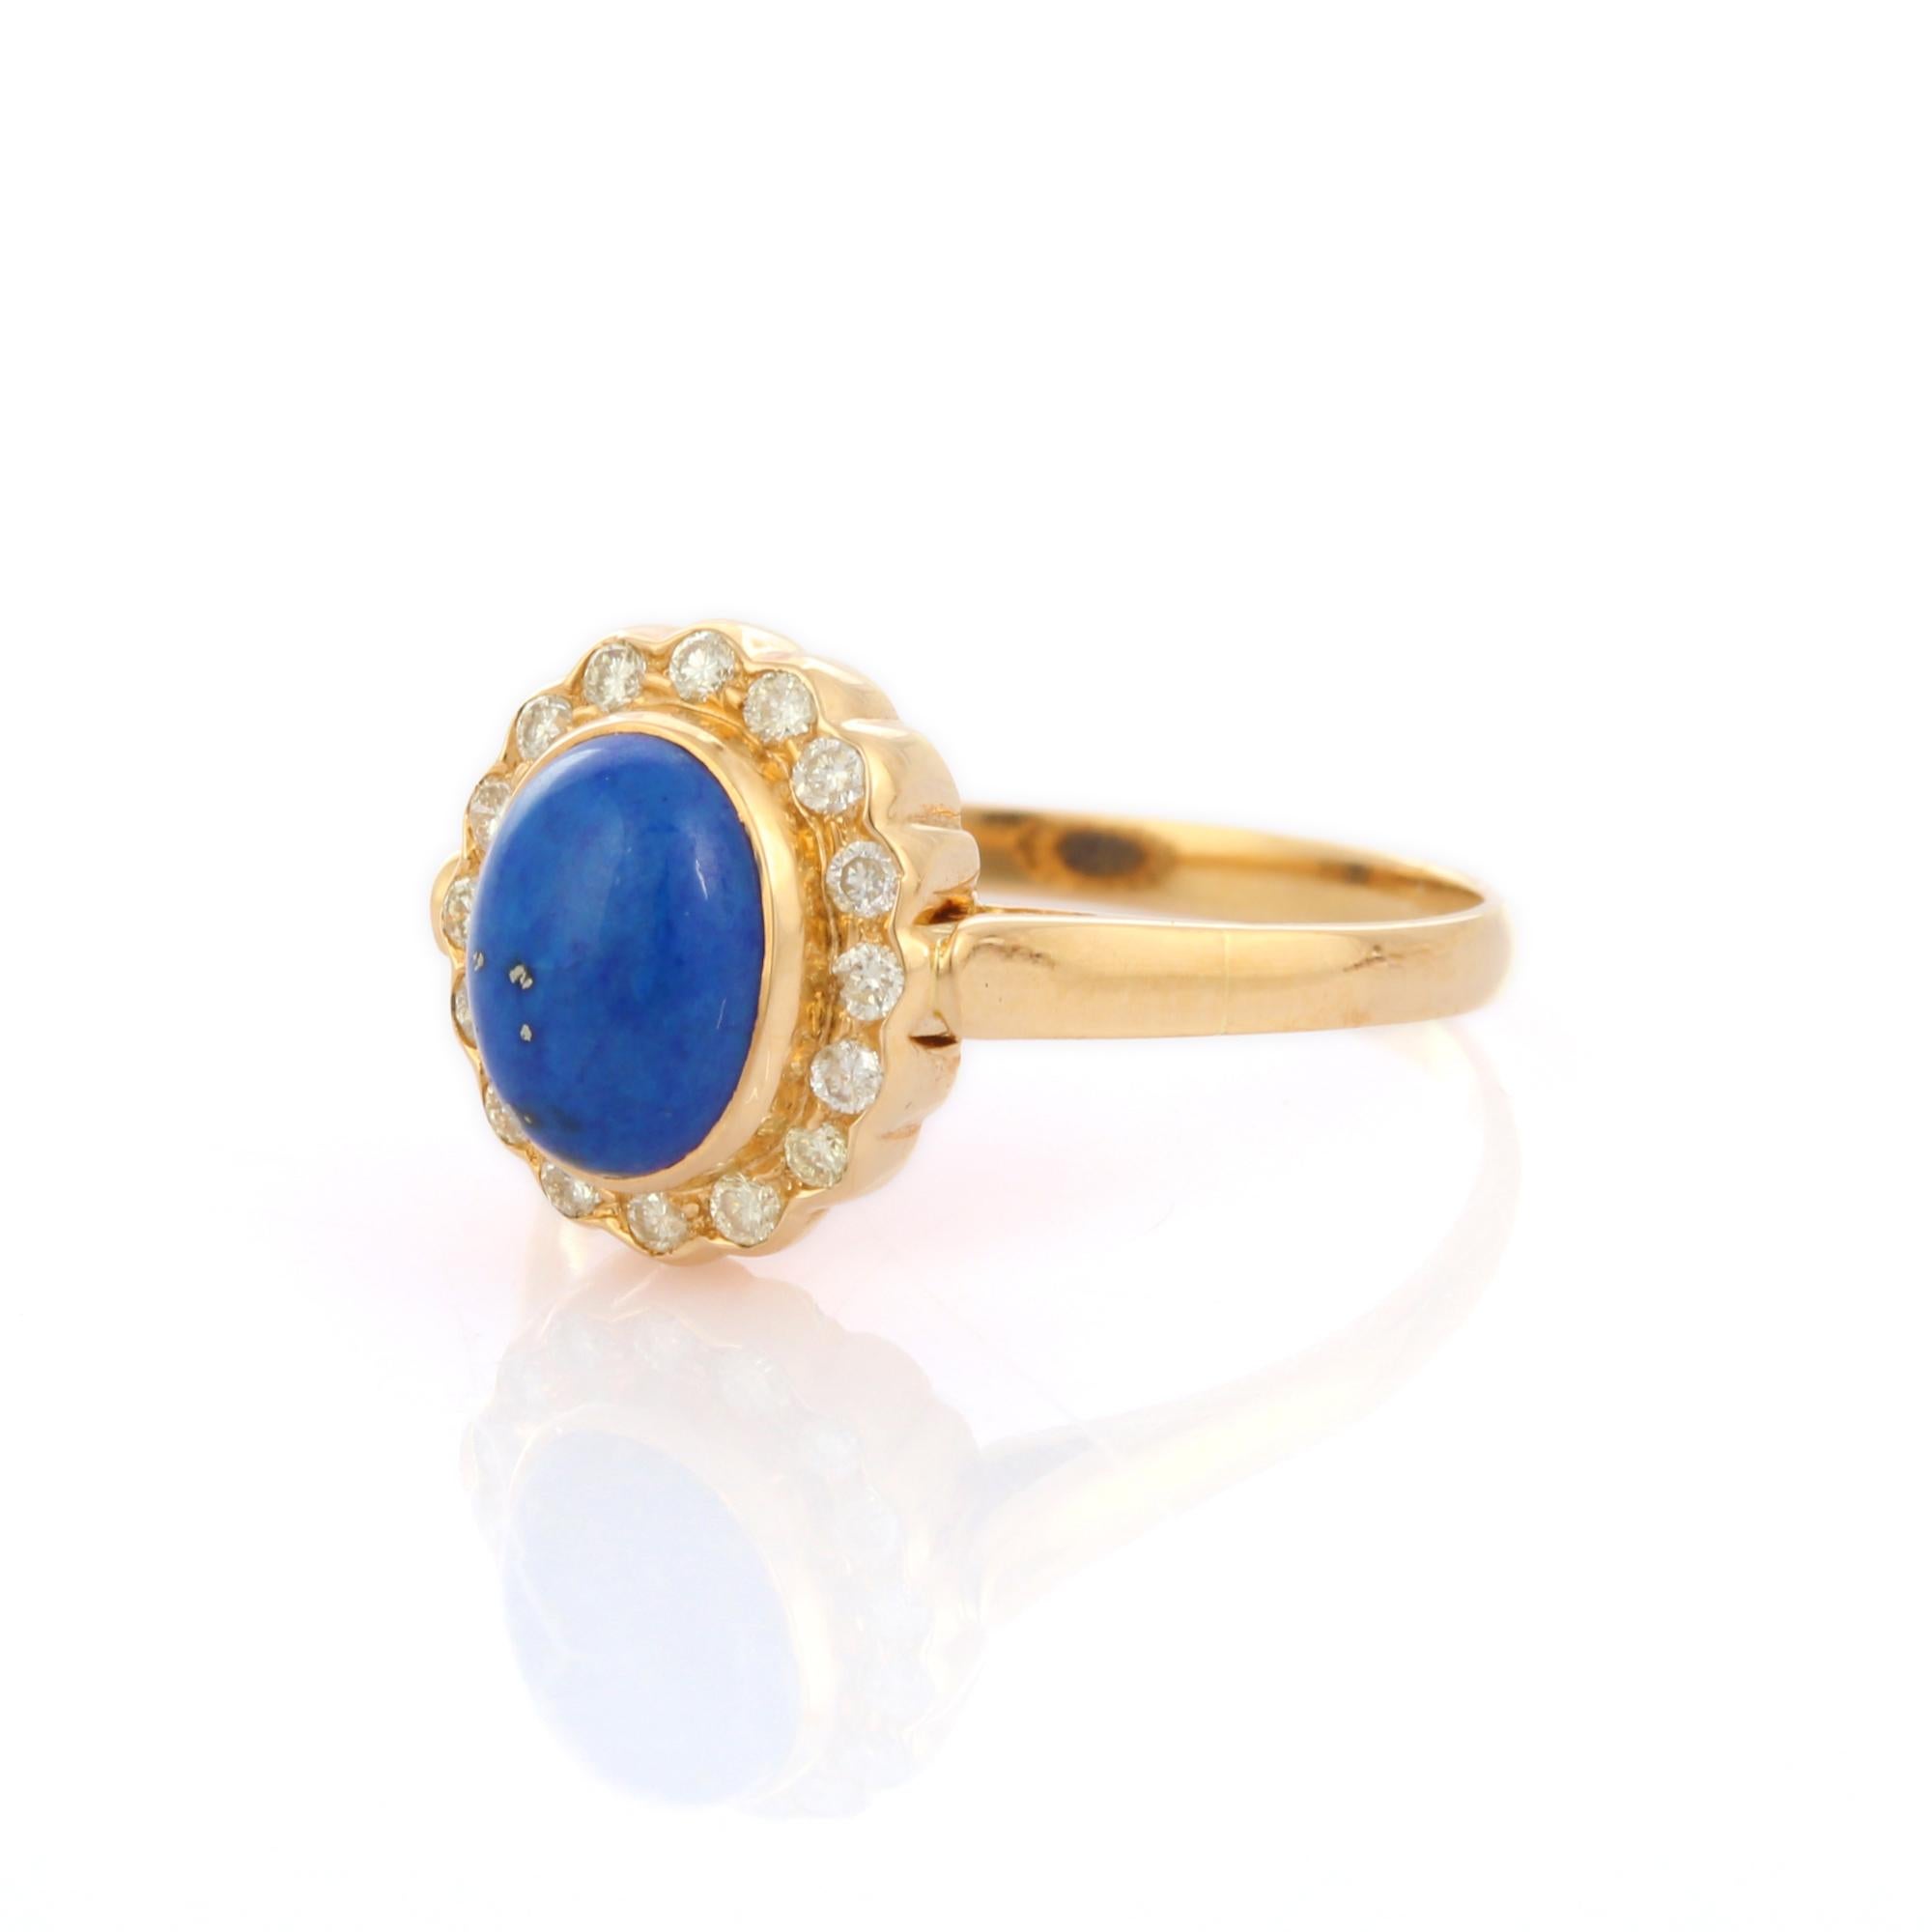 For Sale:  18K Yellow Gold 1.15 Carat Lapis Lazuli with Halo Diamond Cocktail Ring 3